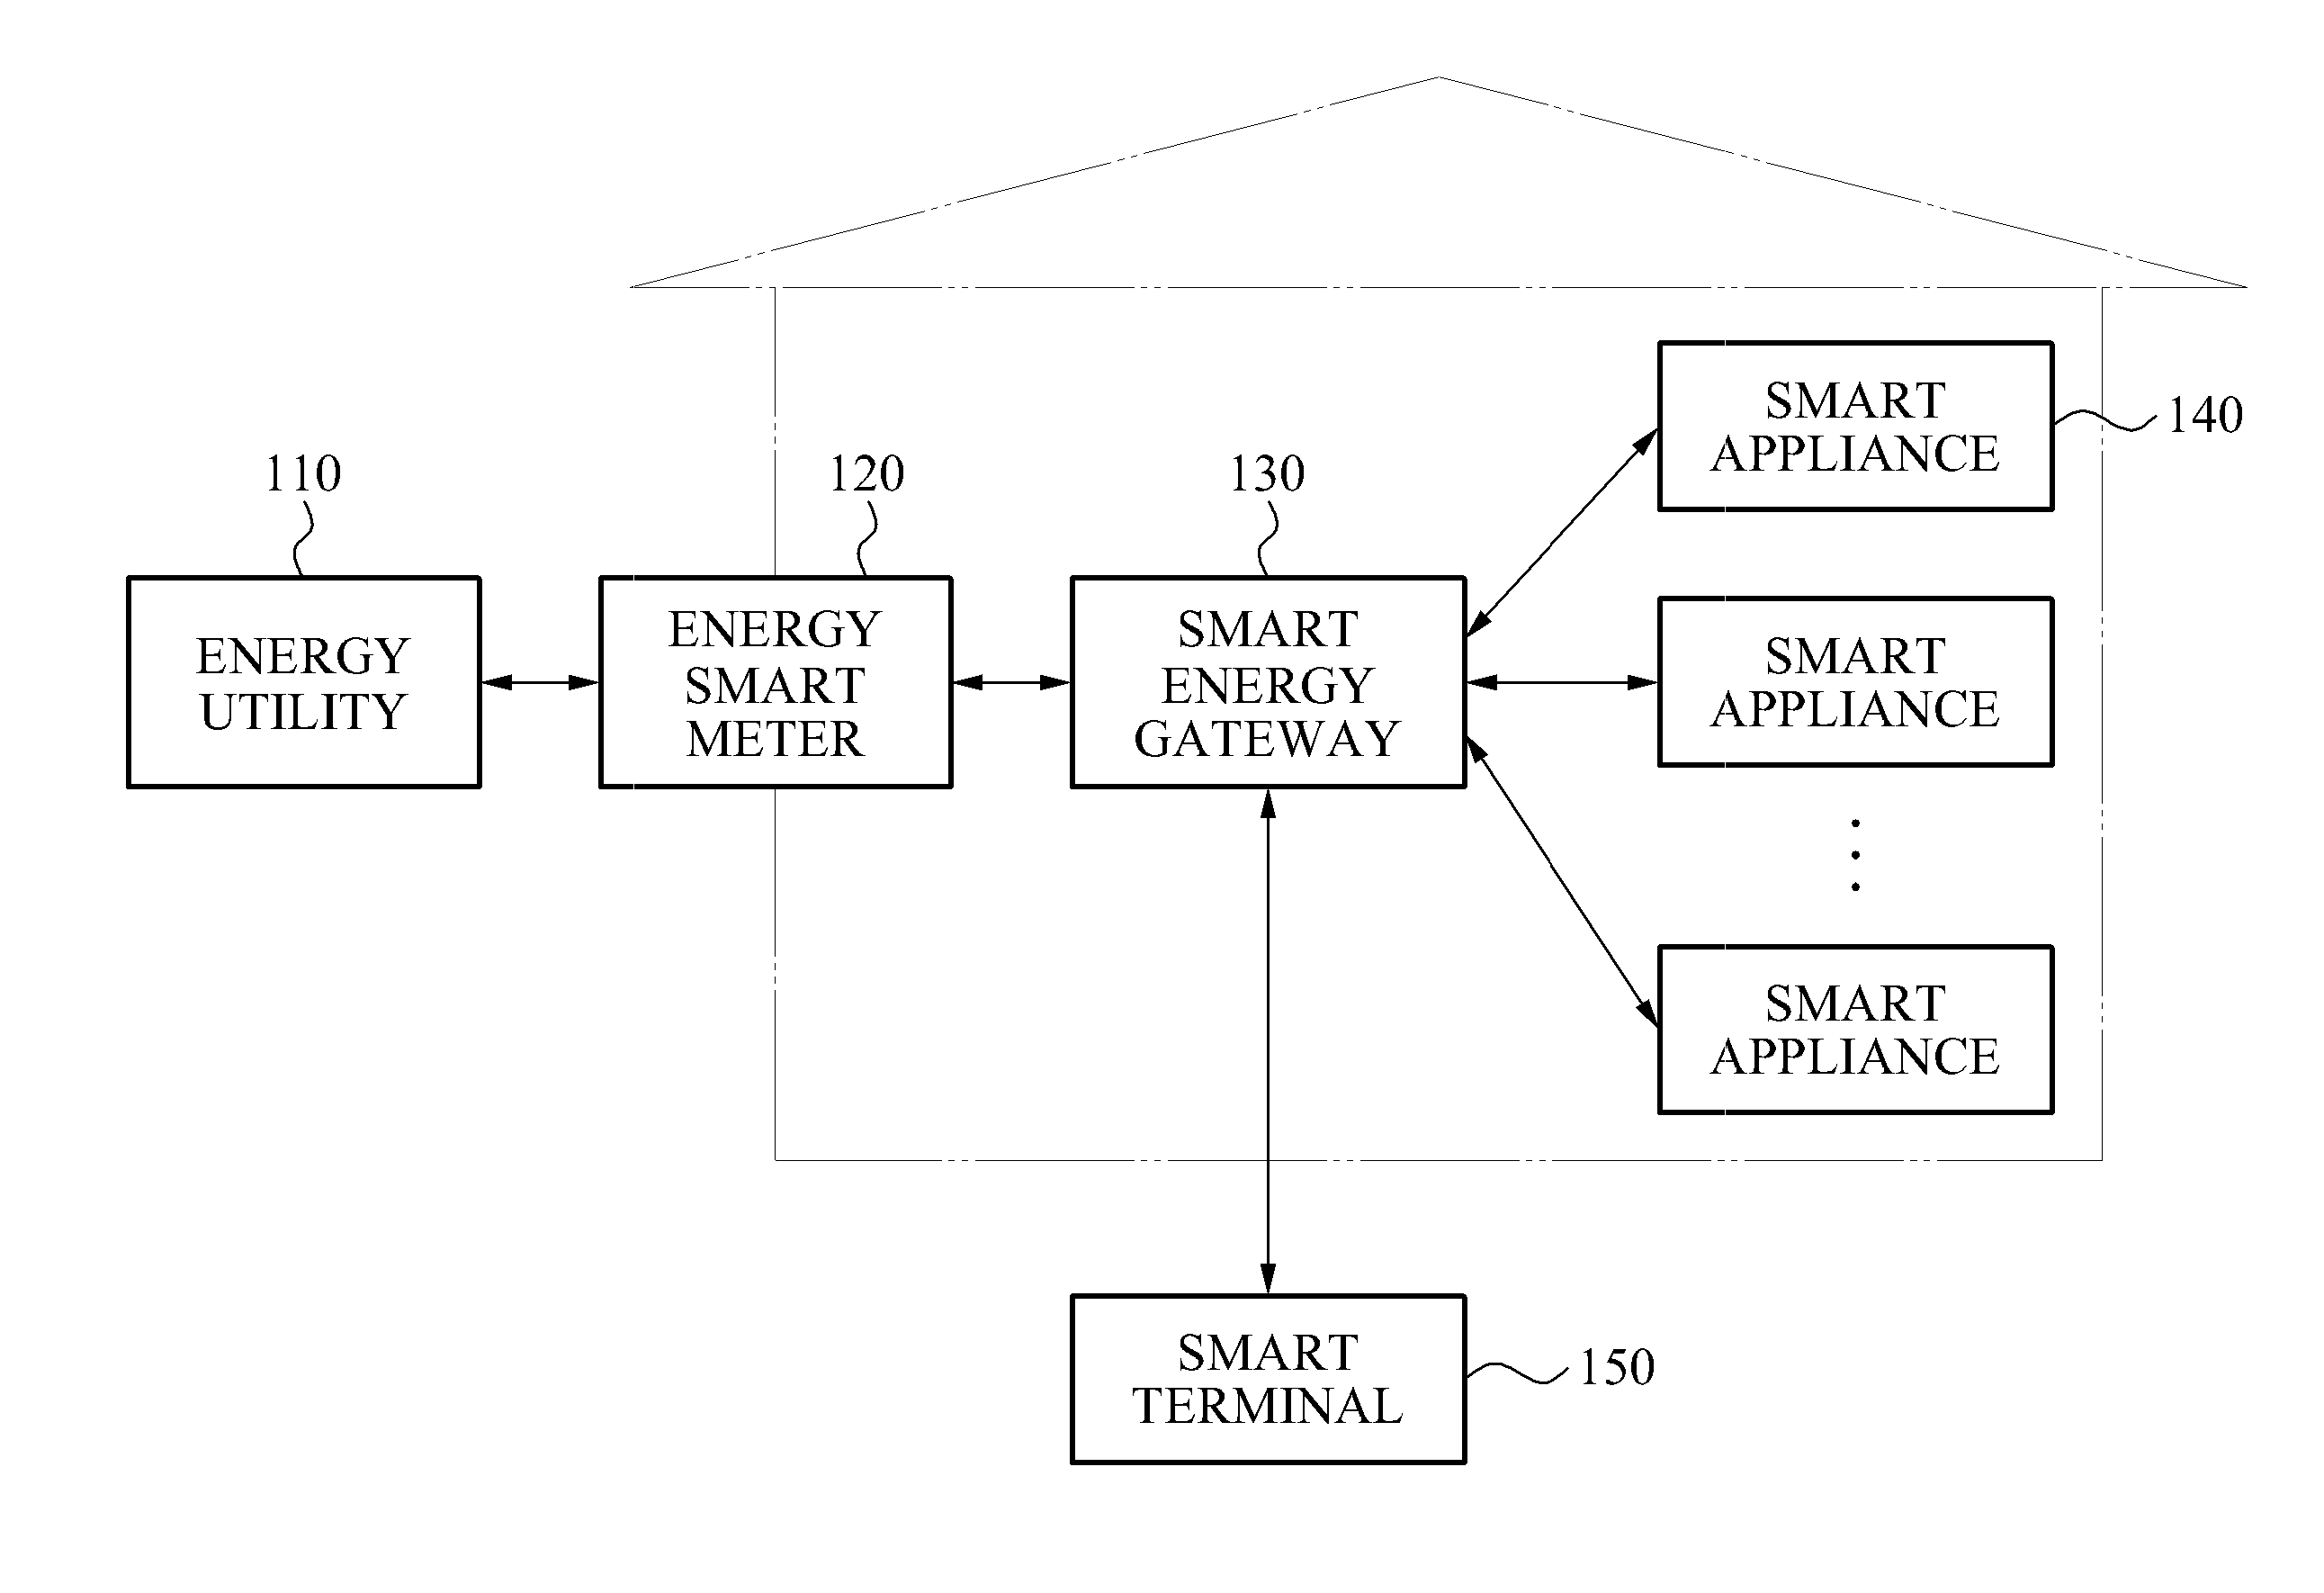 Apparatus and method for controlling smart appliance using smart terminal